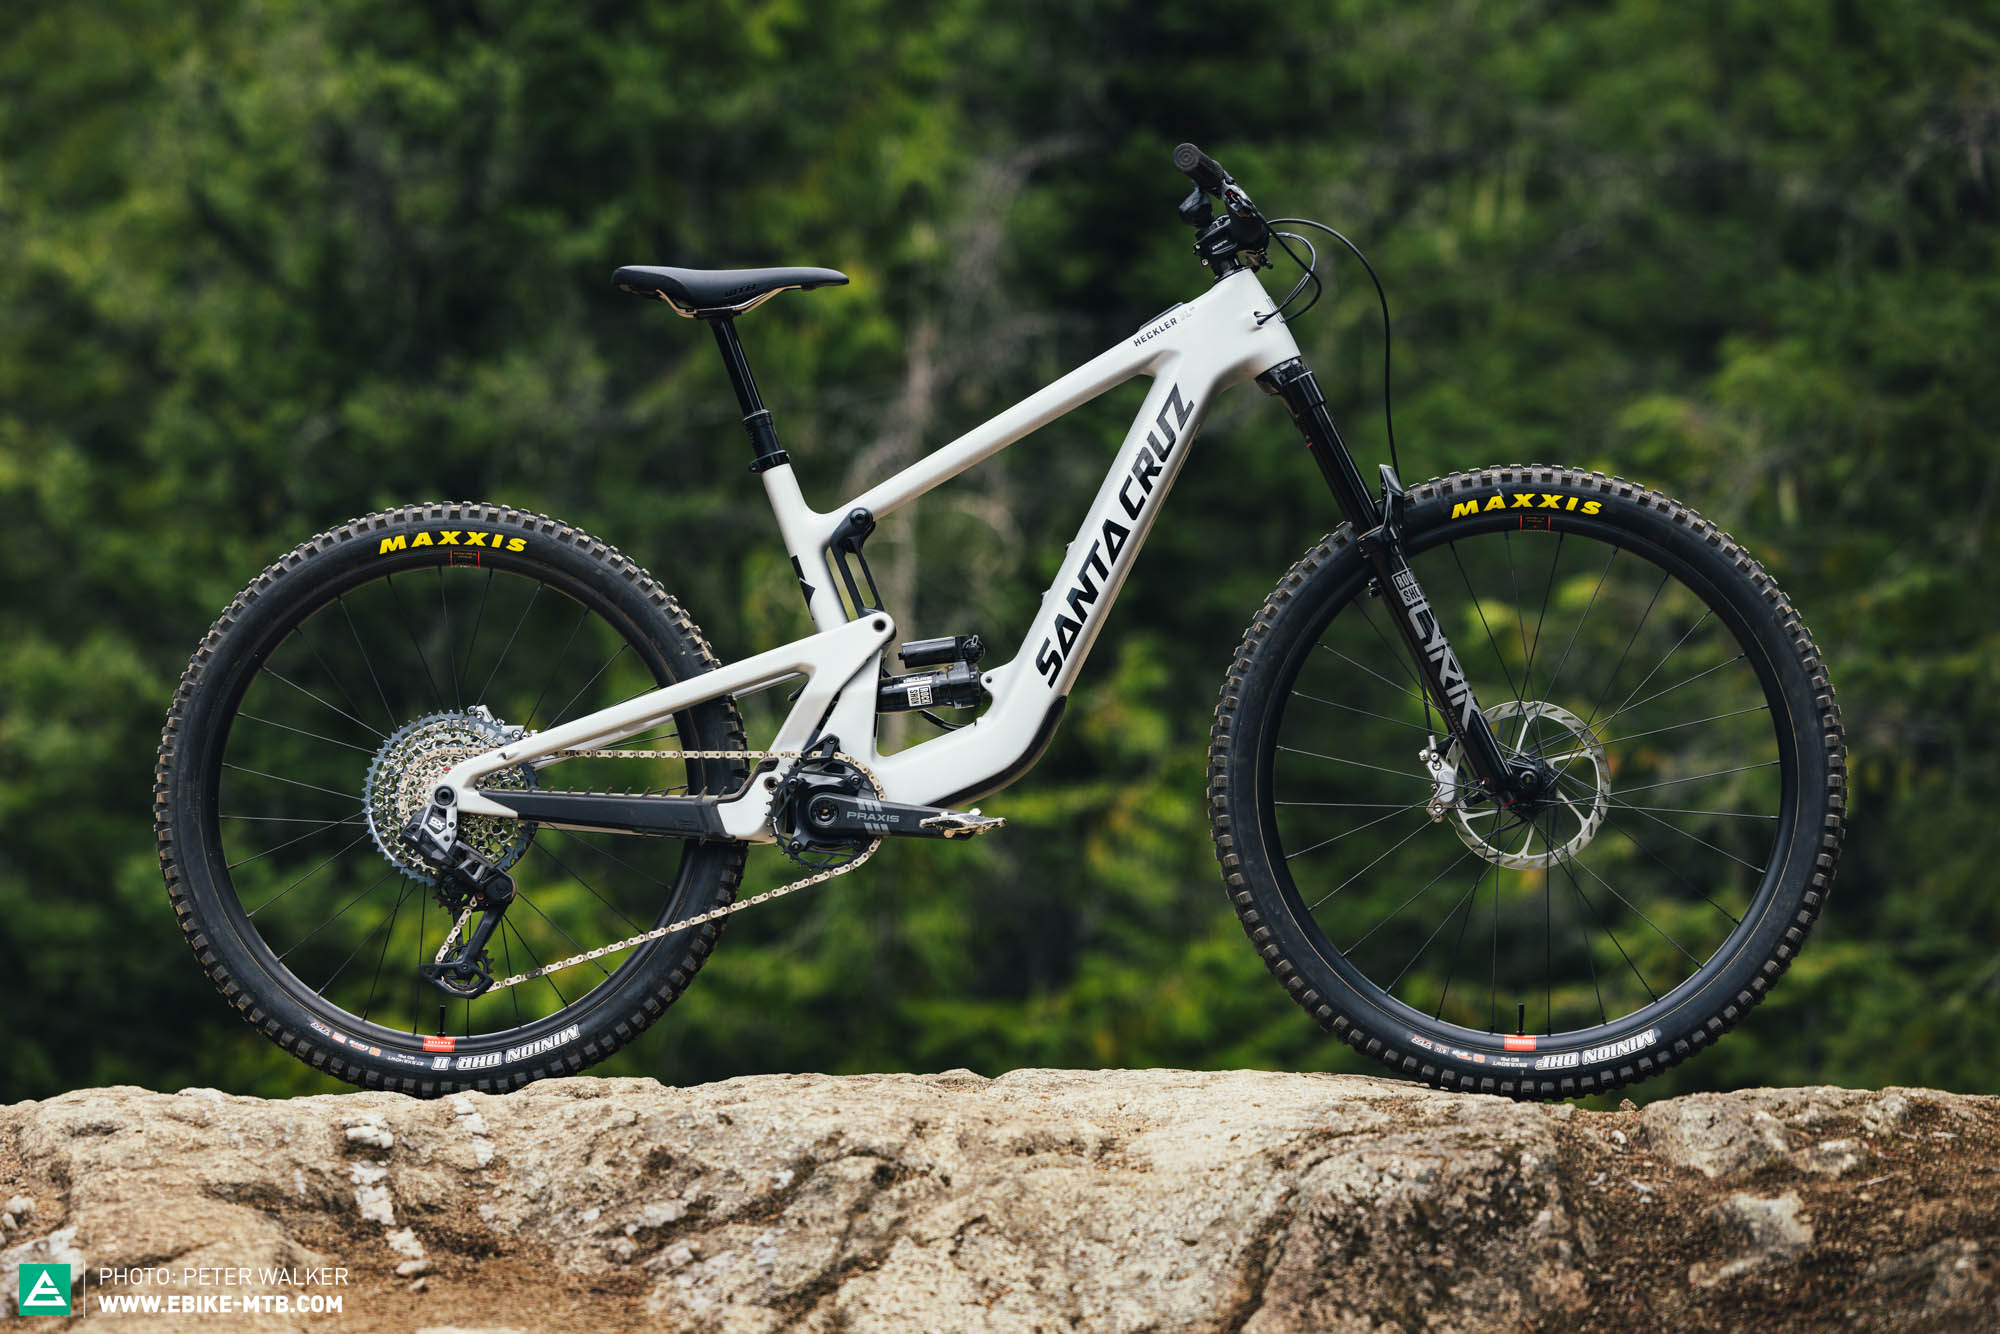 First ride review of the new Santa Cruz Heckler SL – One Heckler extra light, please!